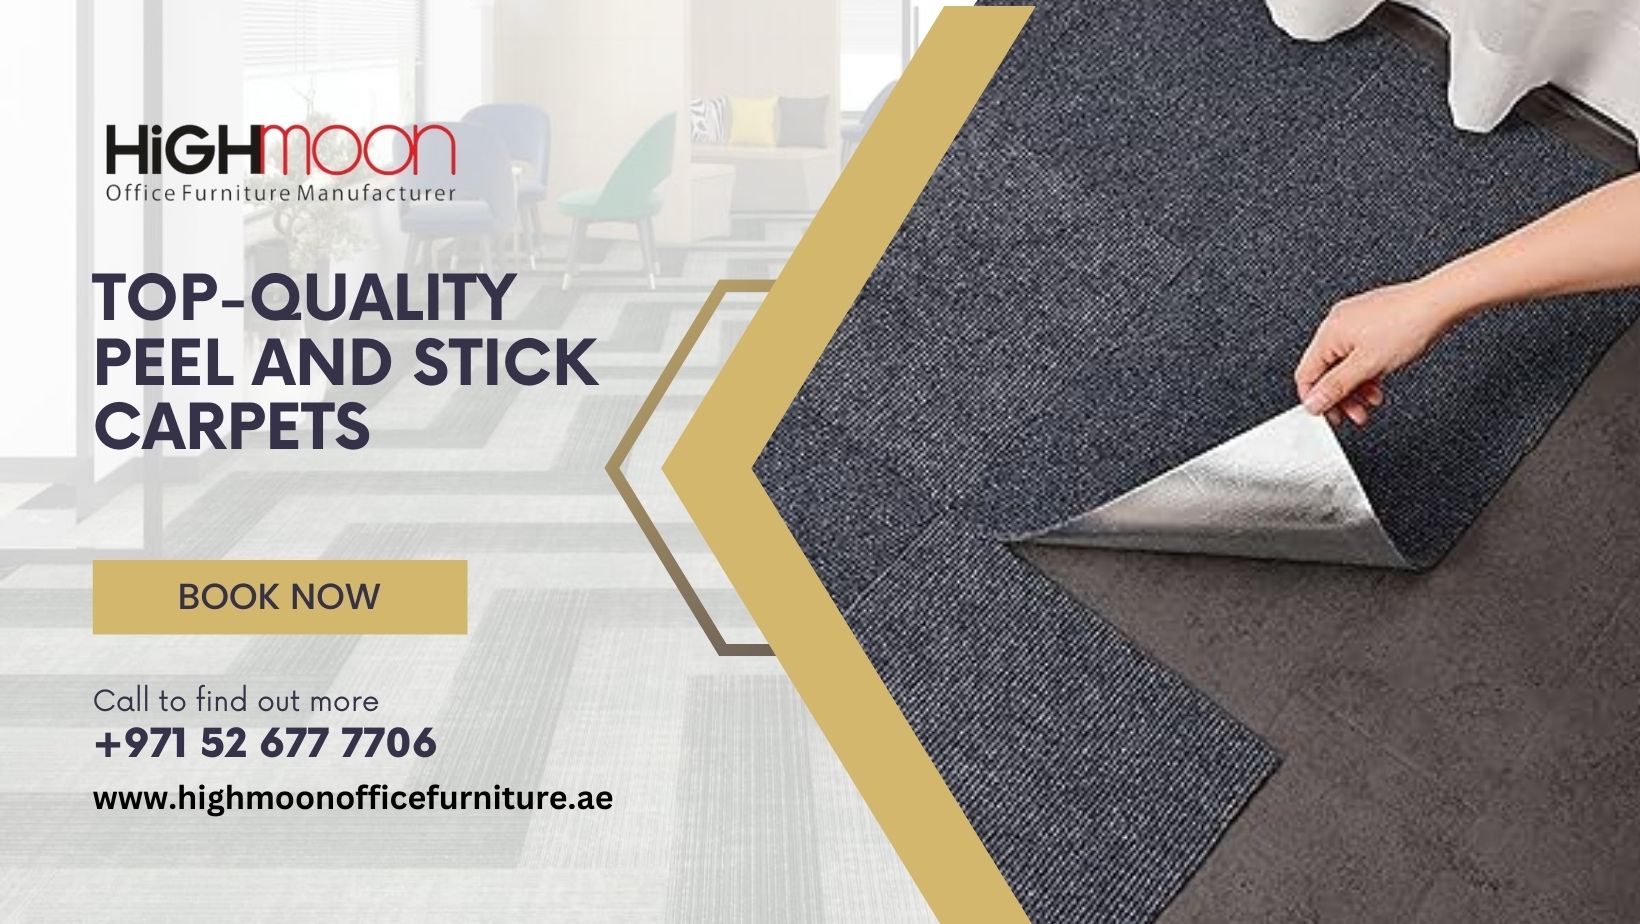 Top-Quality Peel and Stick Carpets